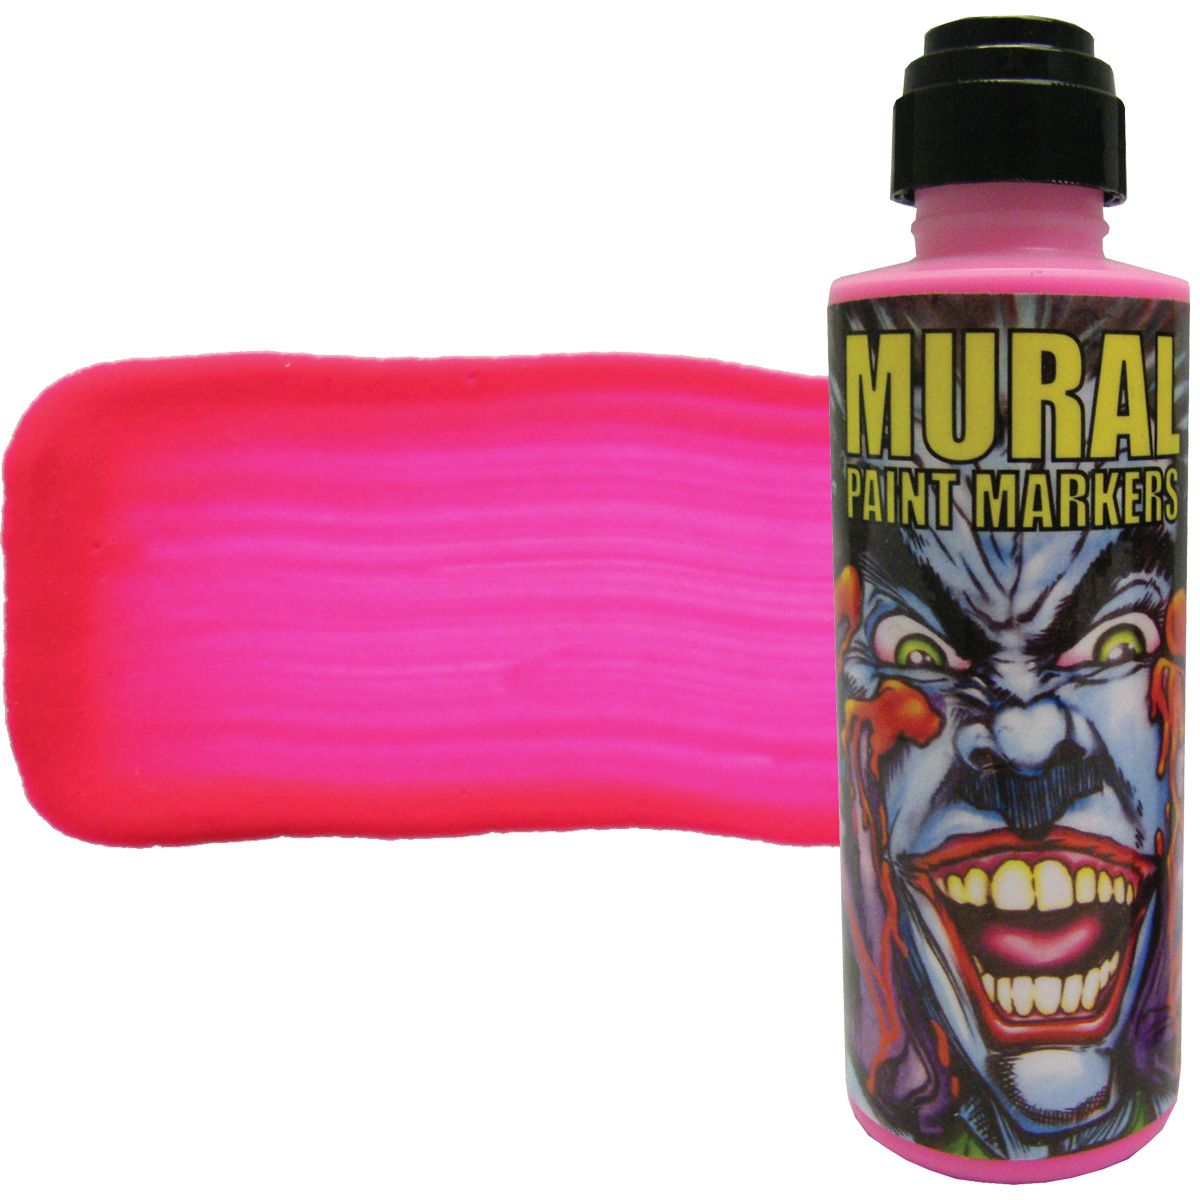 Chroma Acrylic Mural Paint Marker - Sizzling Pink, 4oz